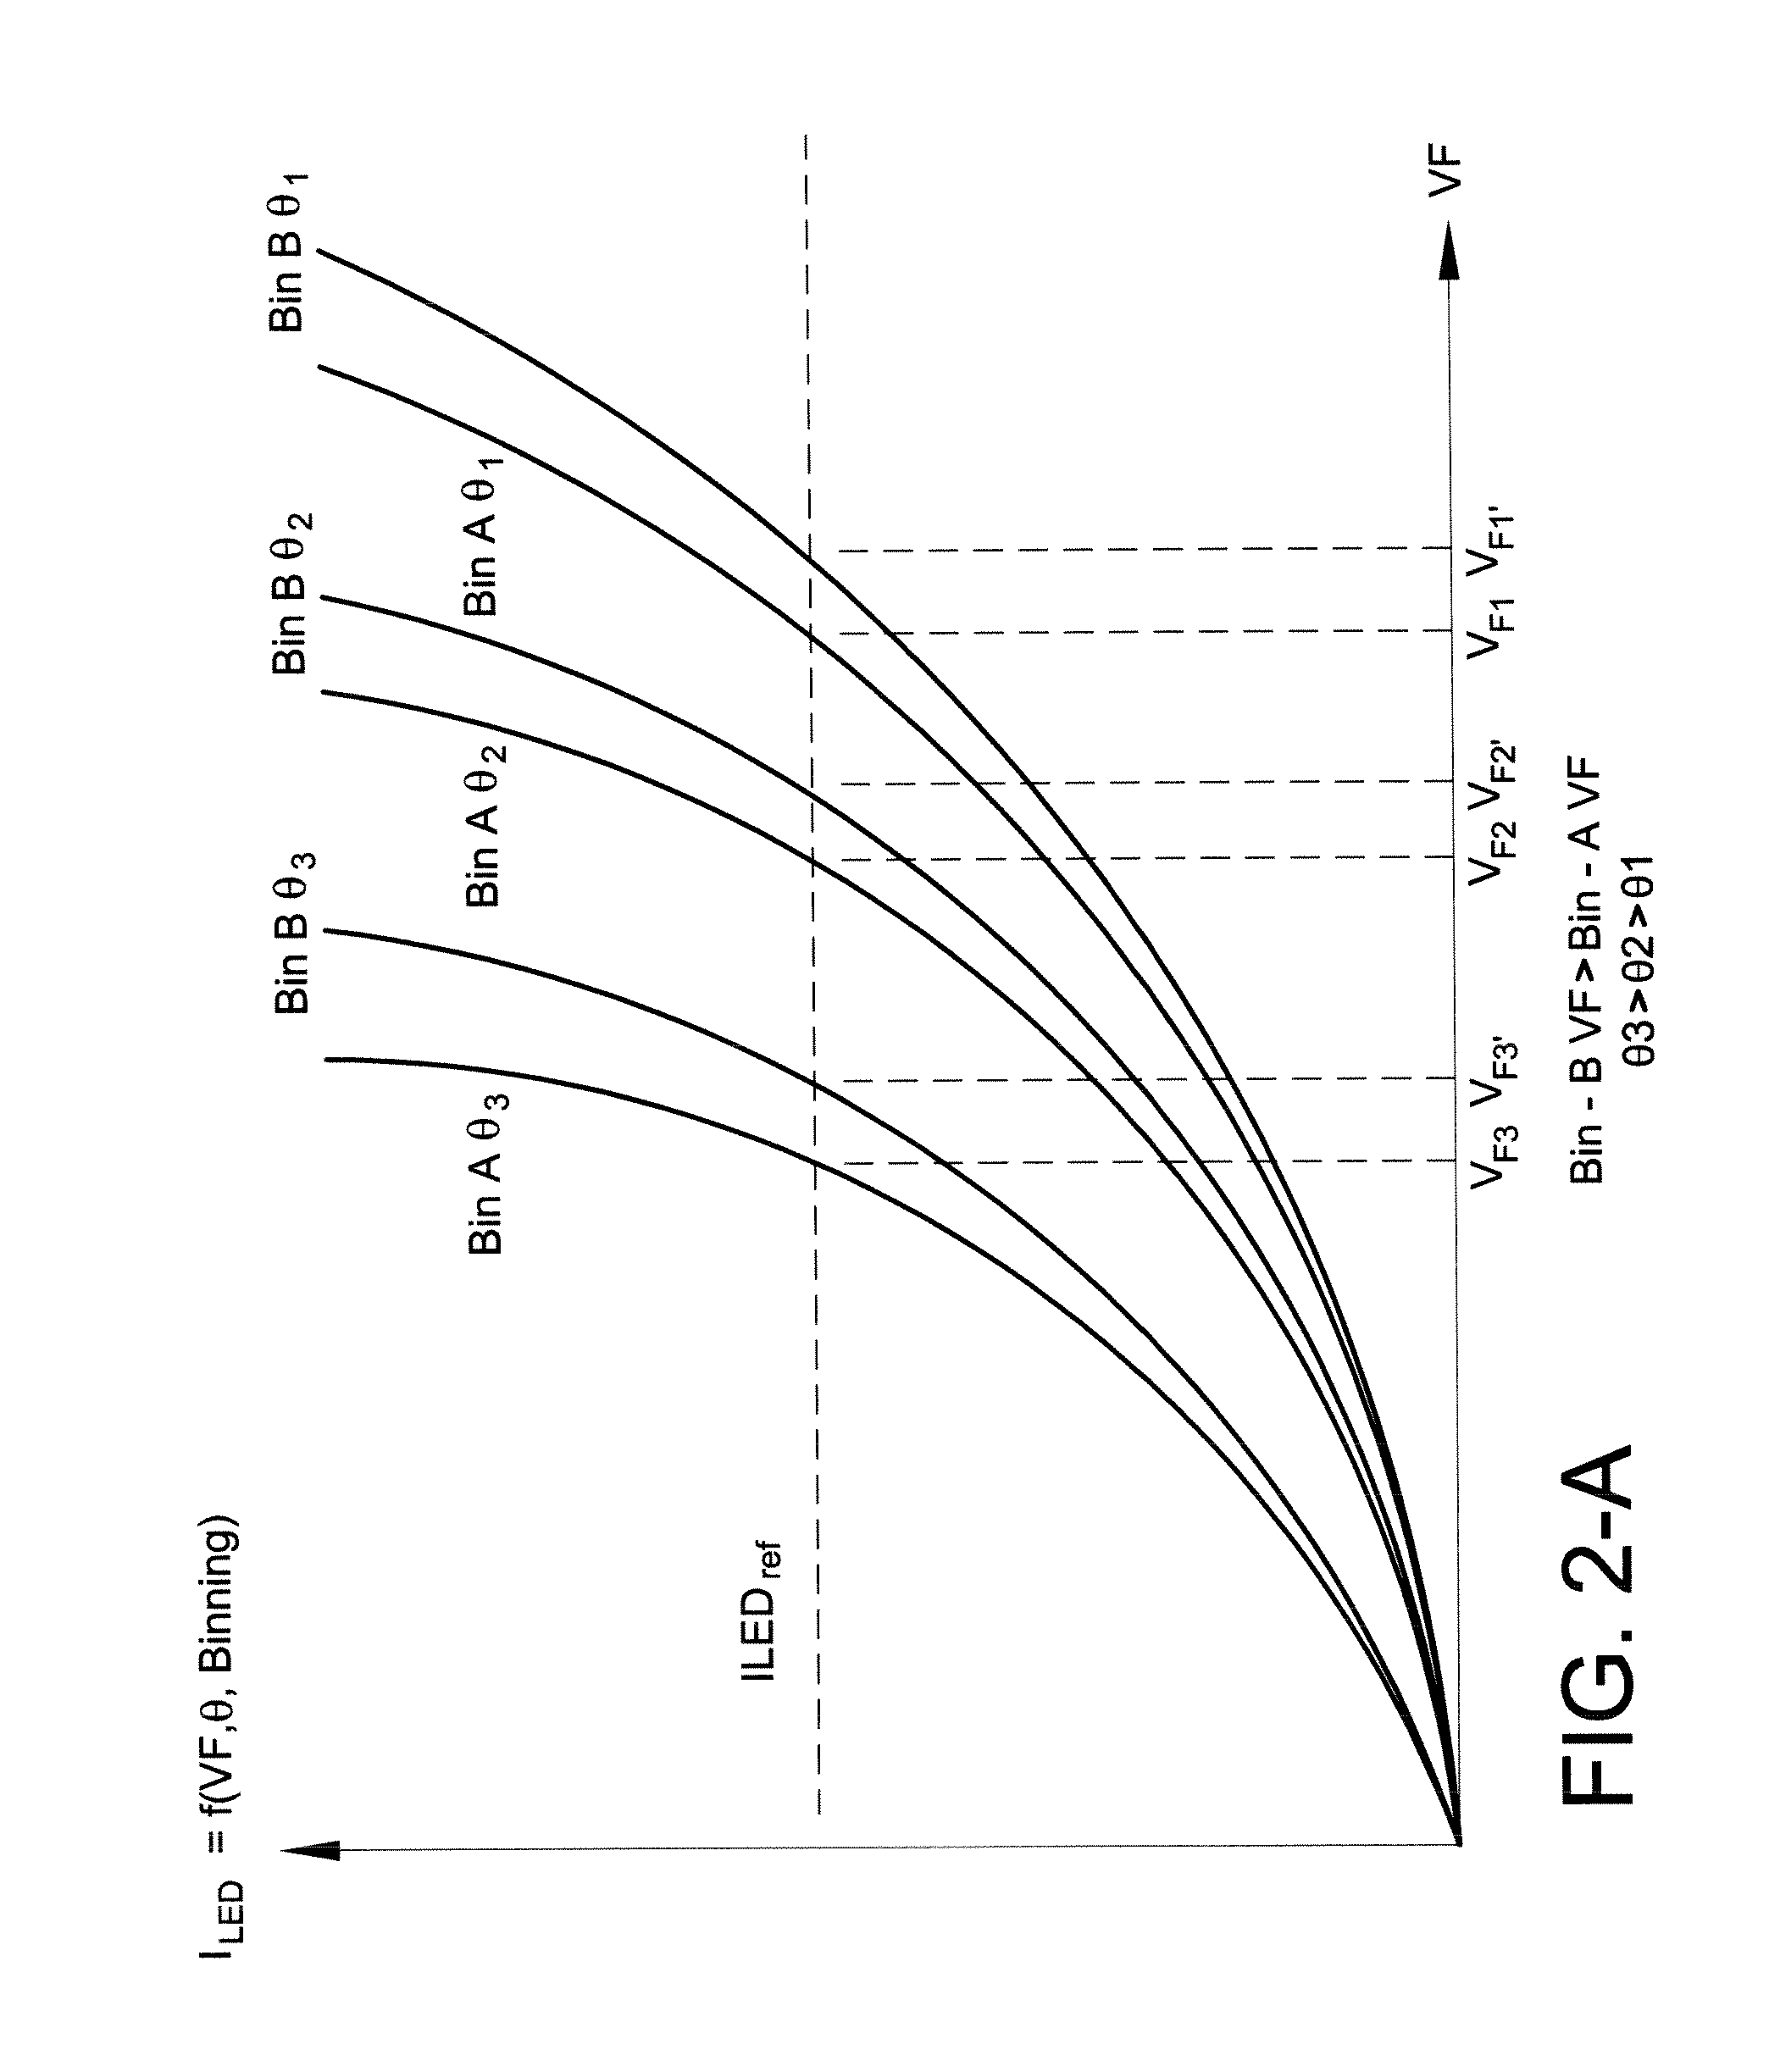 Power control circuit and method